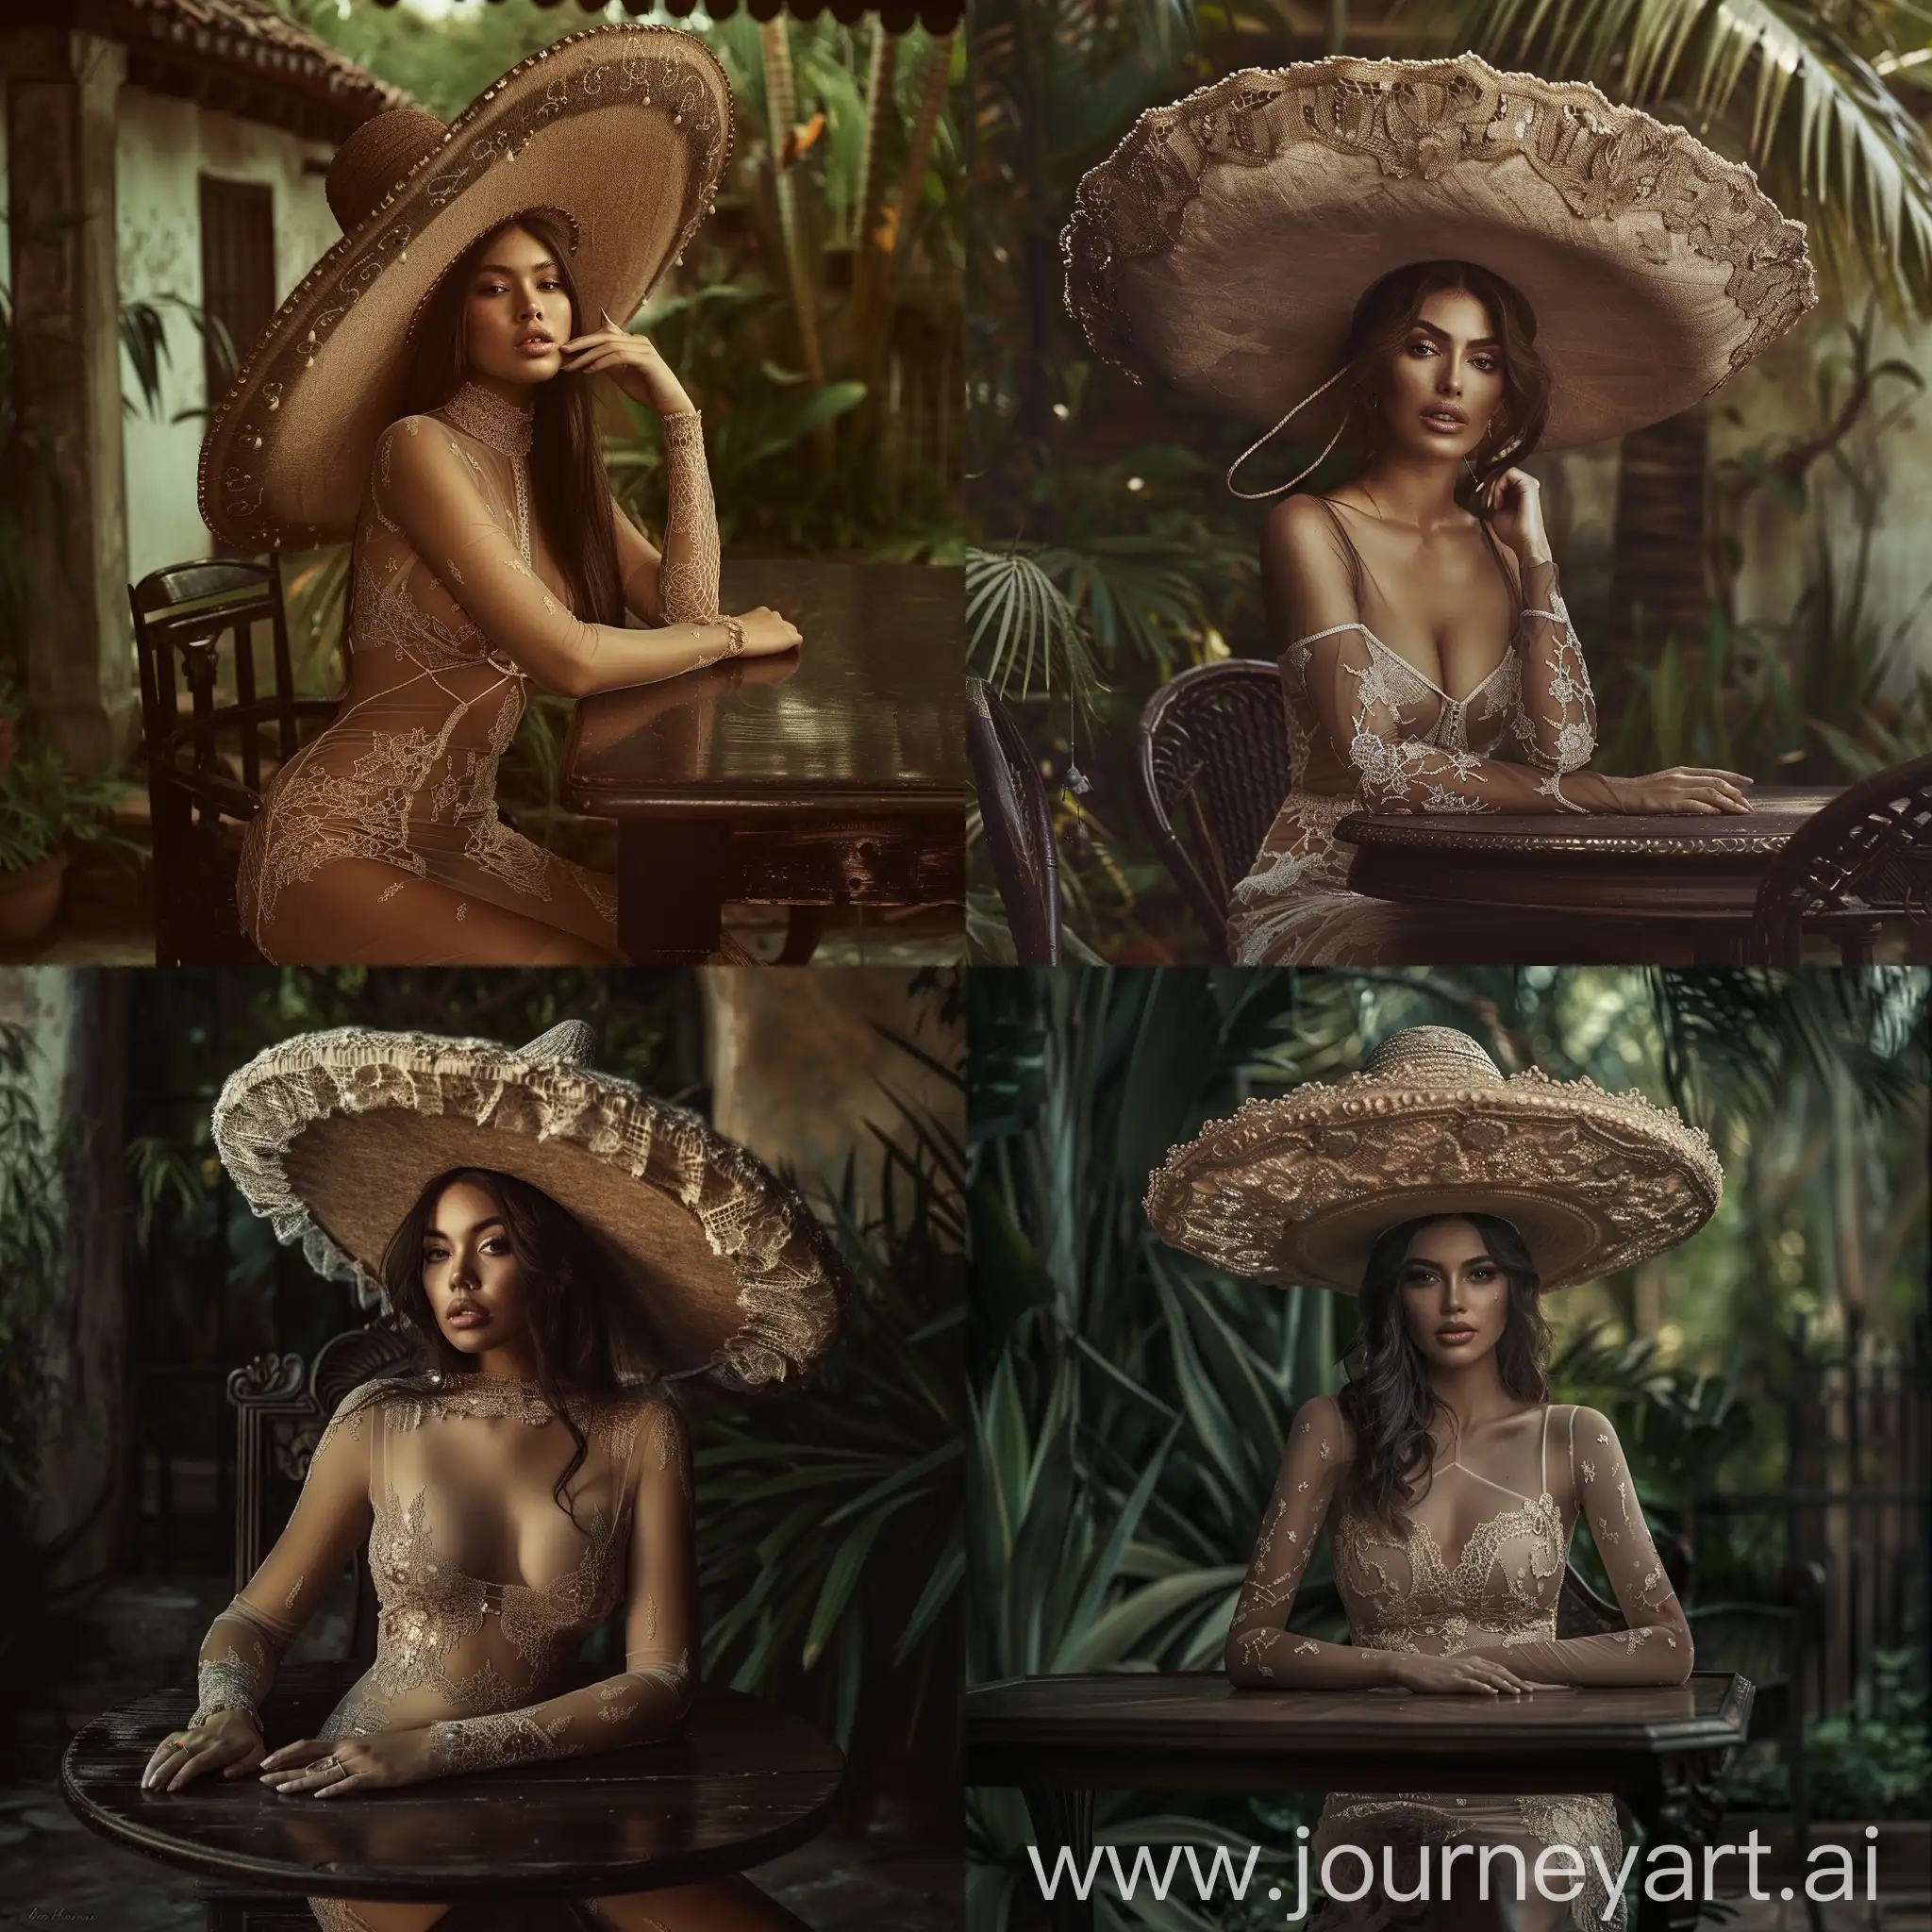 hour glass physique, brunette model, wearing a short laced sheer dress, wearing a large elegant women's sombrero hat, in an old colonial garden sitting at a dark wood table, the model dose not exist in real life